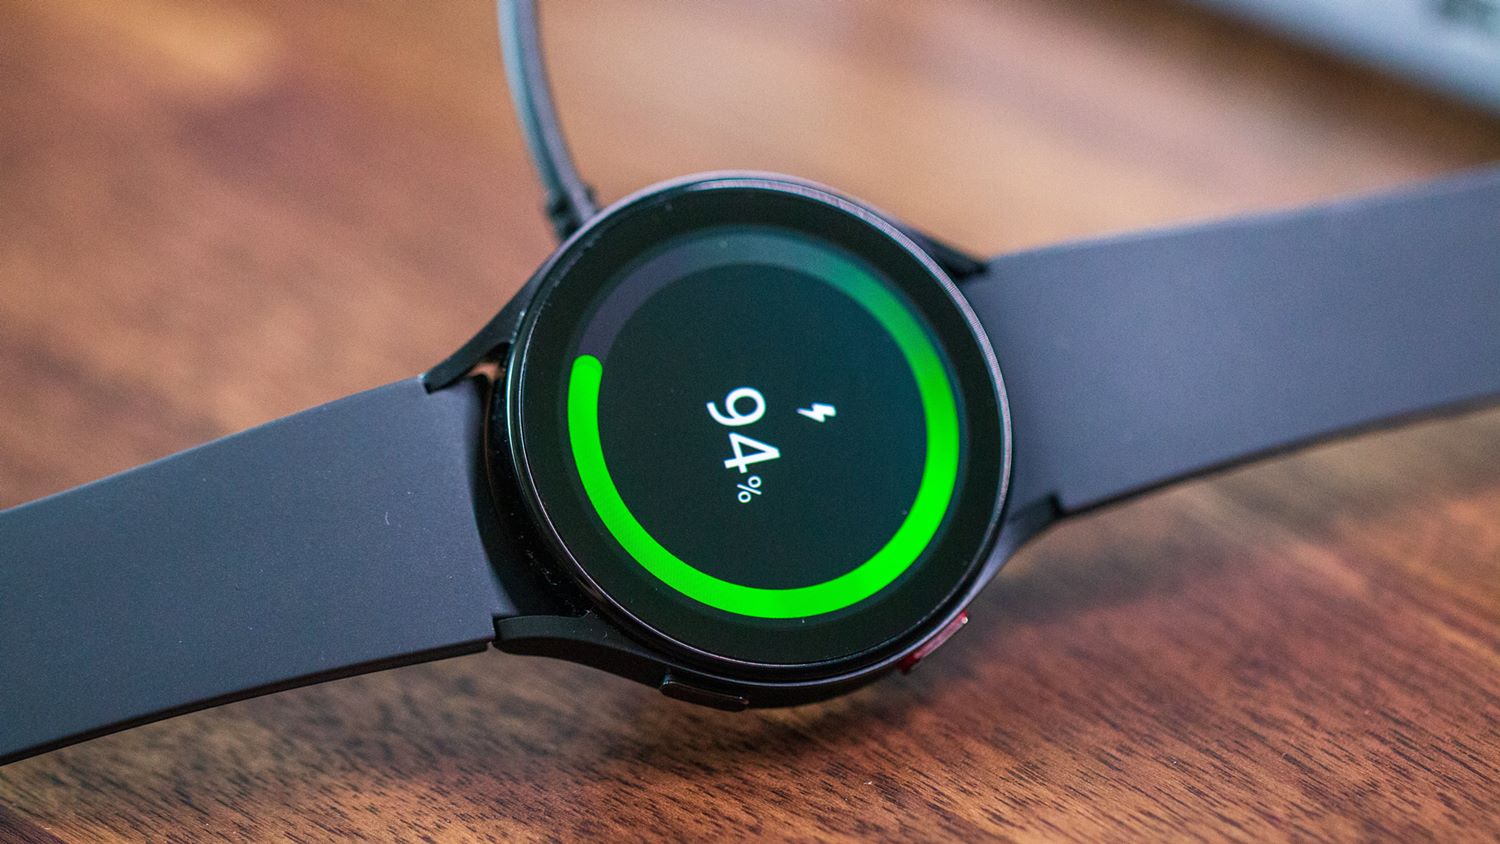 How To Charge Samsung Watch Without Dock